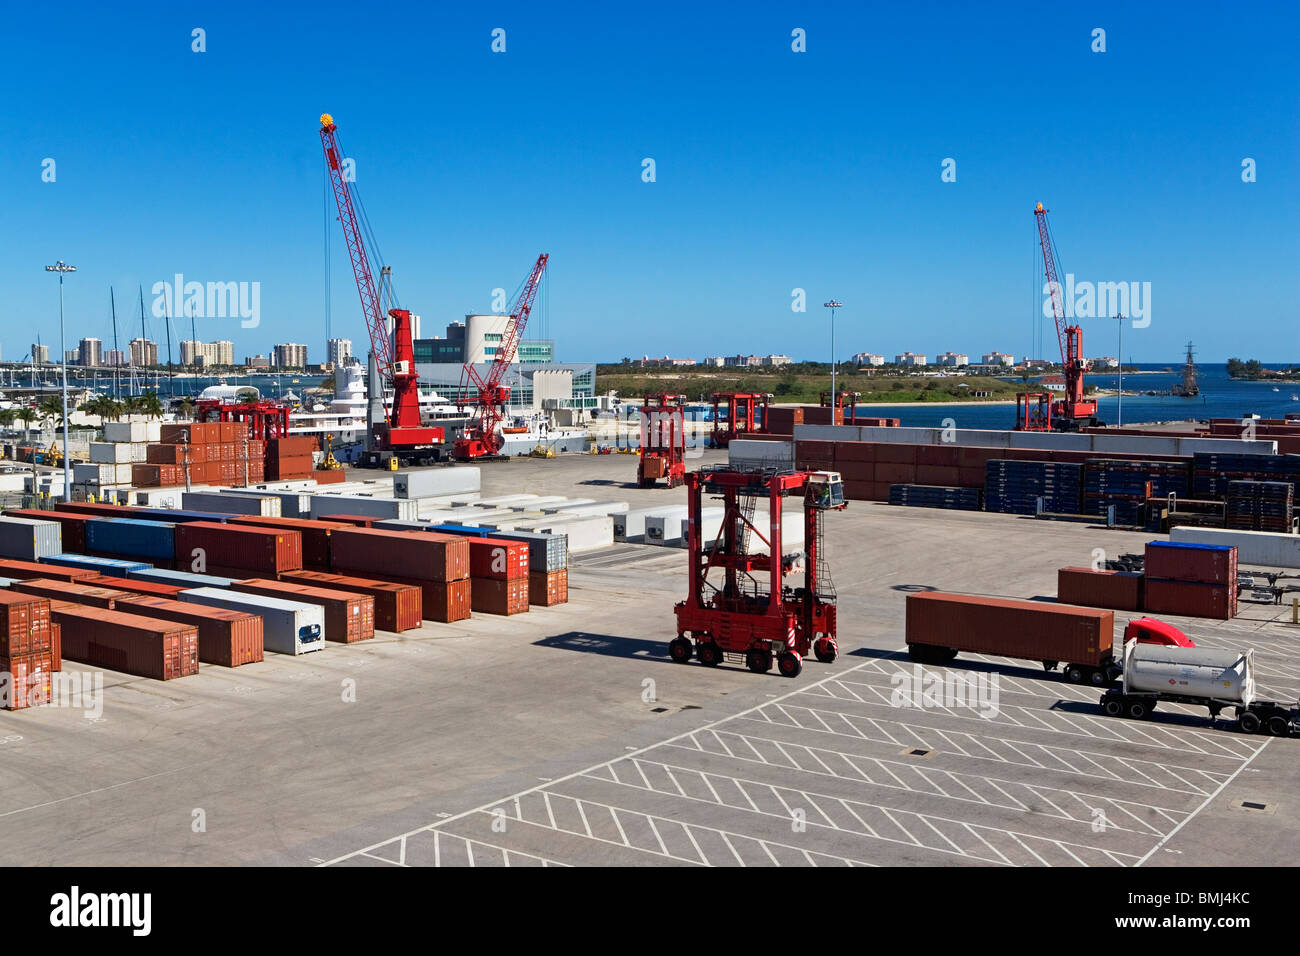 Commercial dock Stock Photo